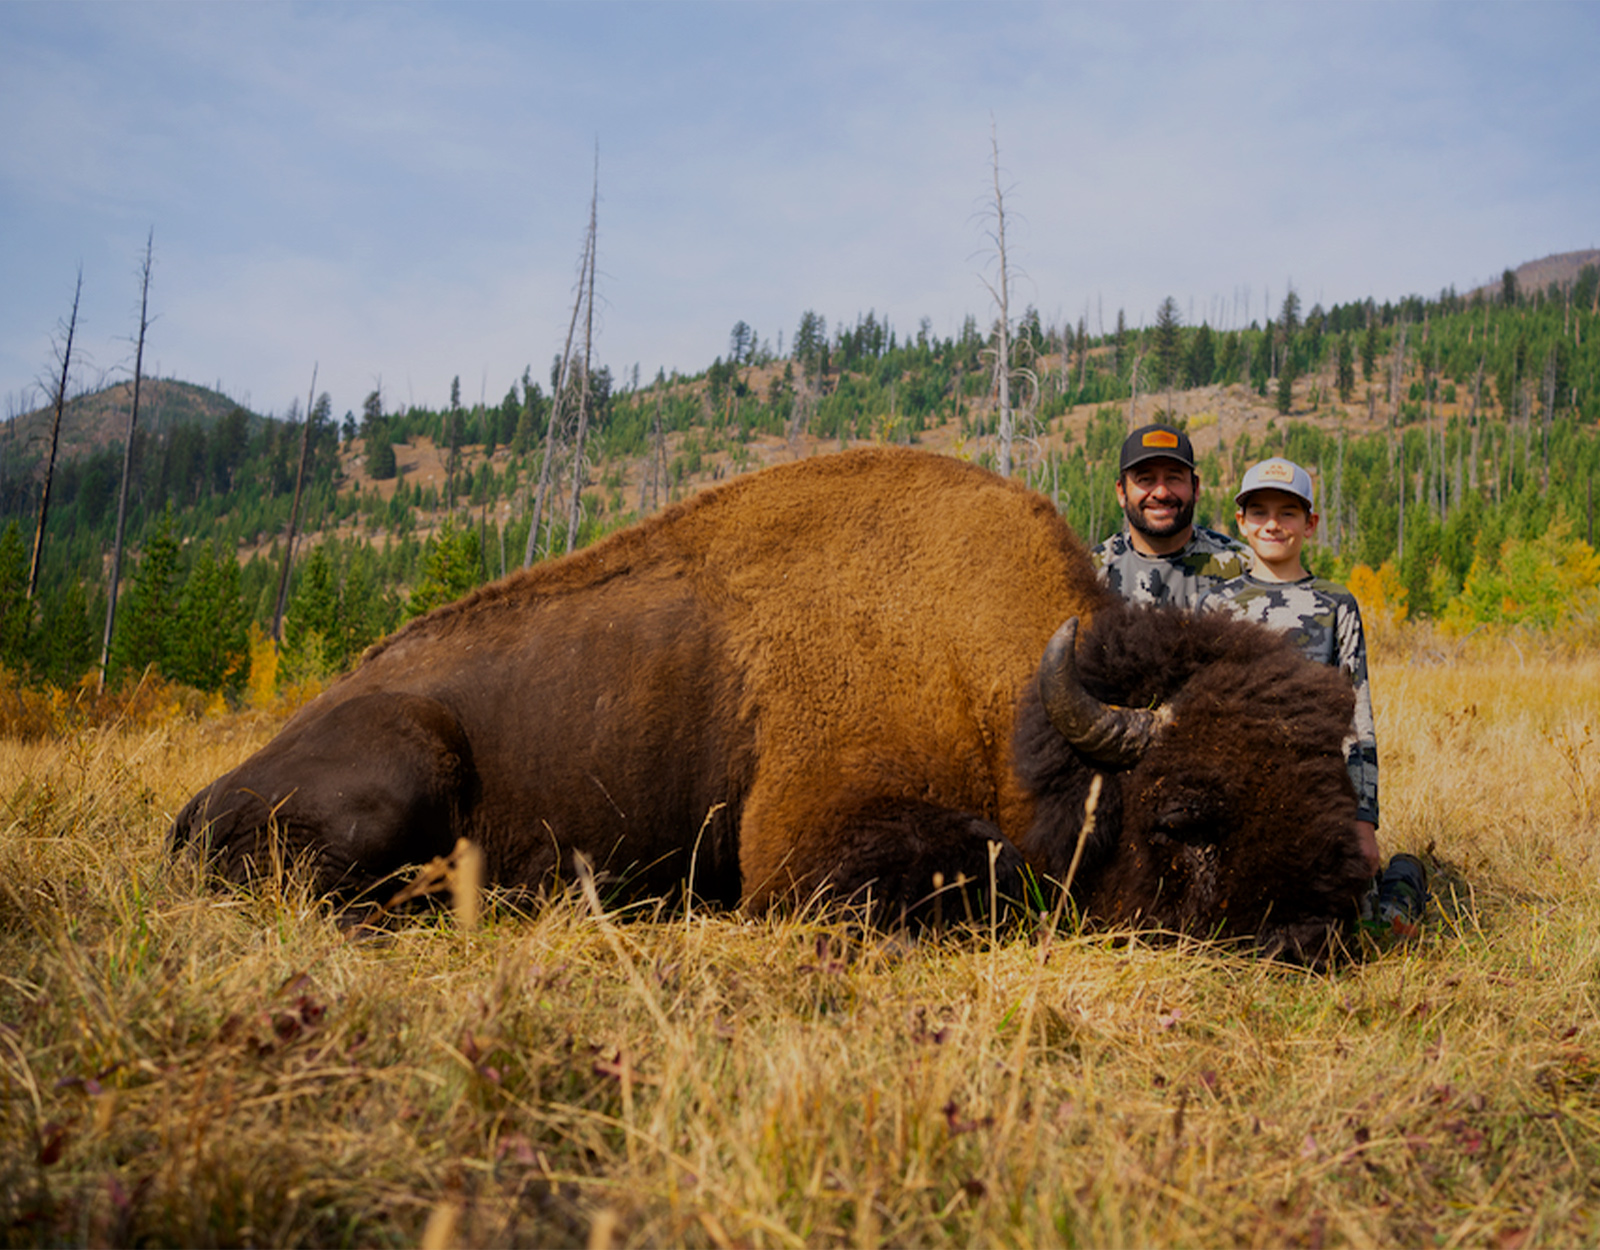 Father and son hunting a bison in Wyoming.